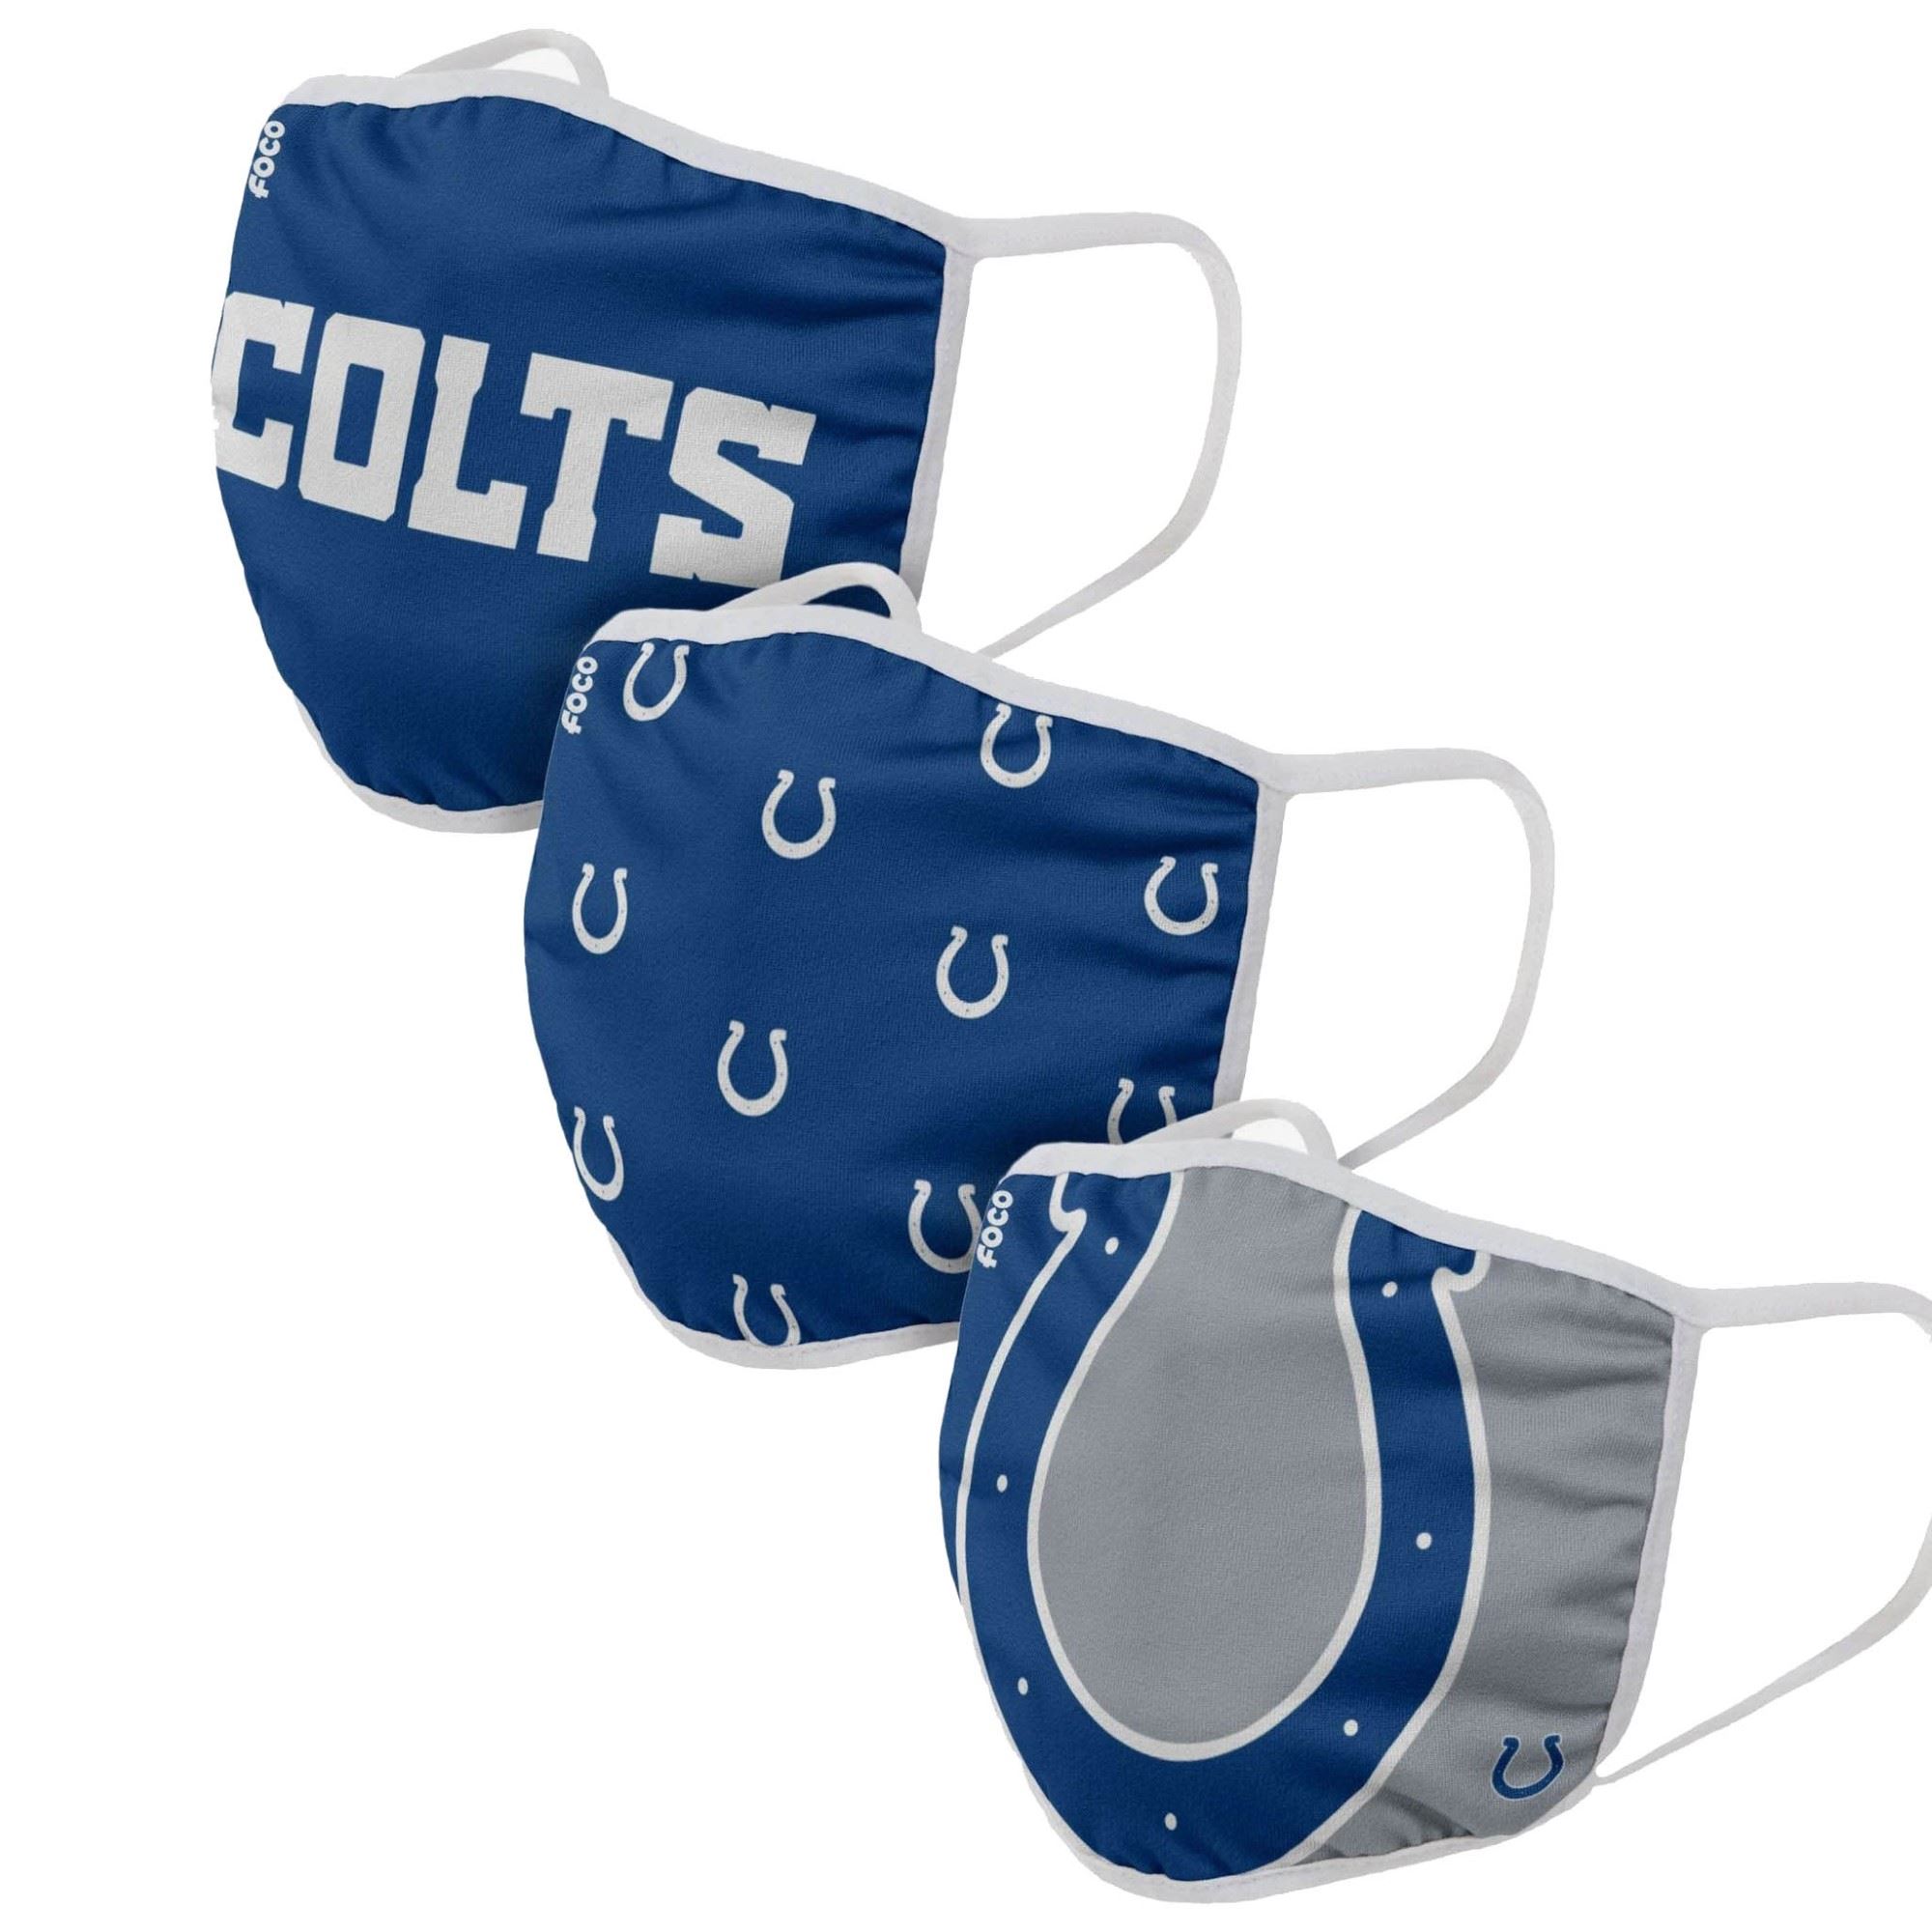 Indianapolis Colts NFL Face Covering 3Pack Face Mask Forever Collectibles